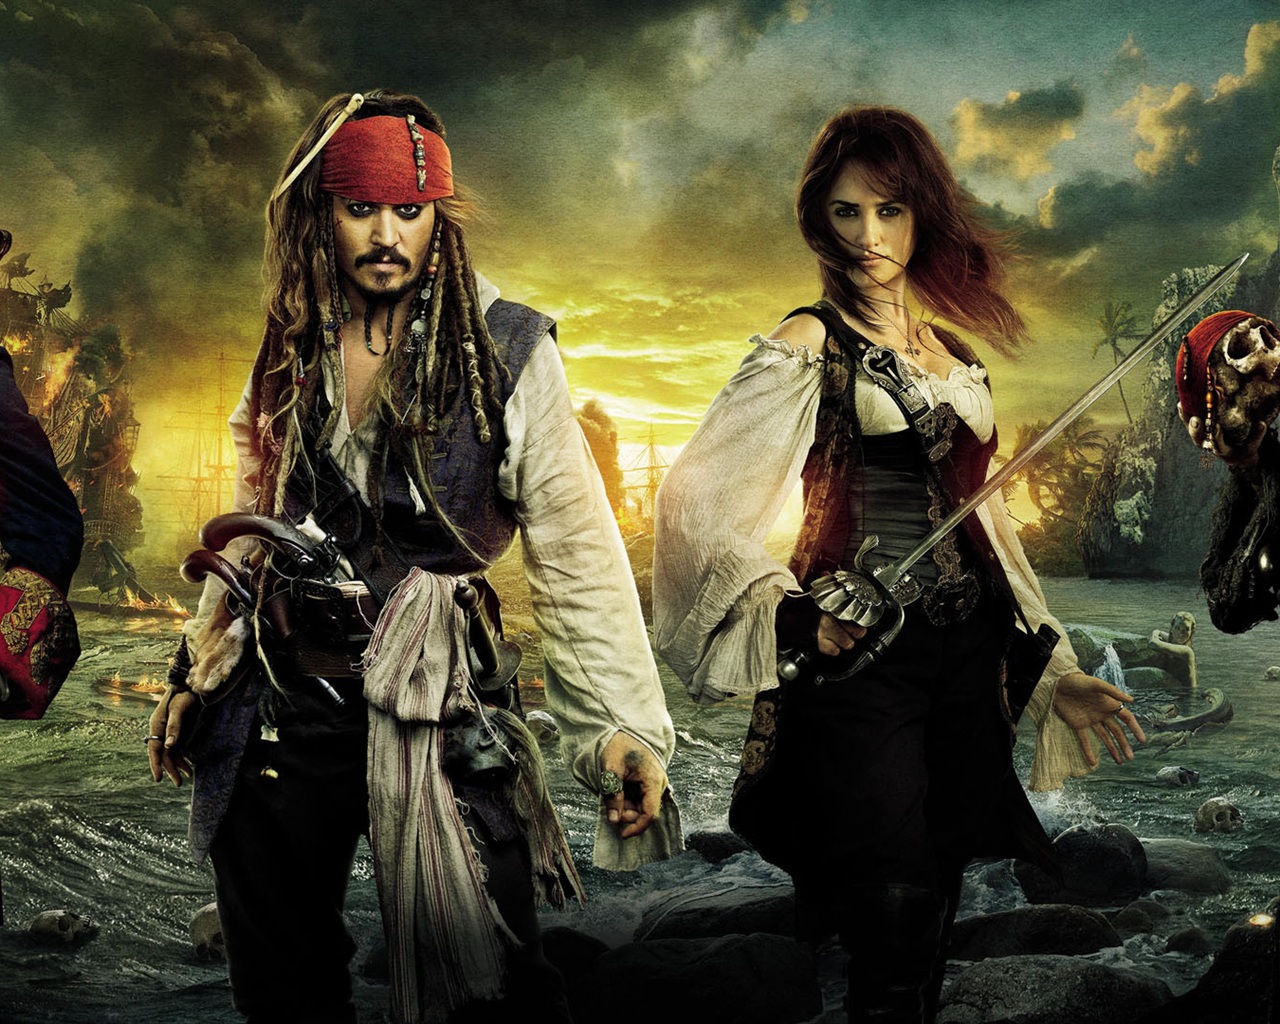 Wallpaper Pirates of the Caribbean On Stranger Tides HD 1920x1080 Full HD 2K Picture, Image